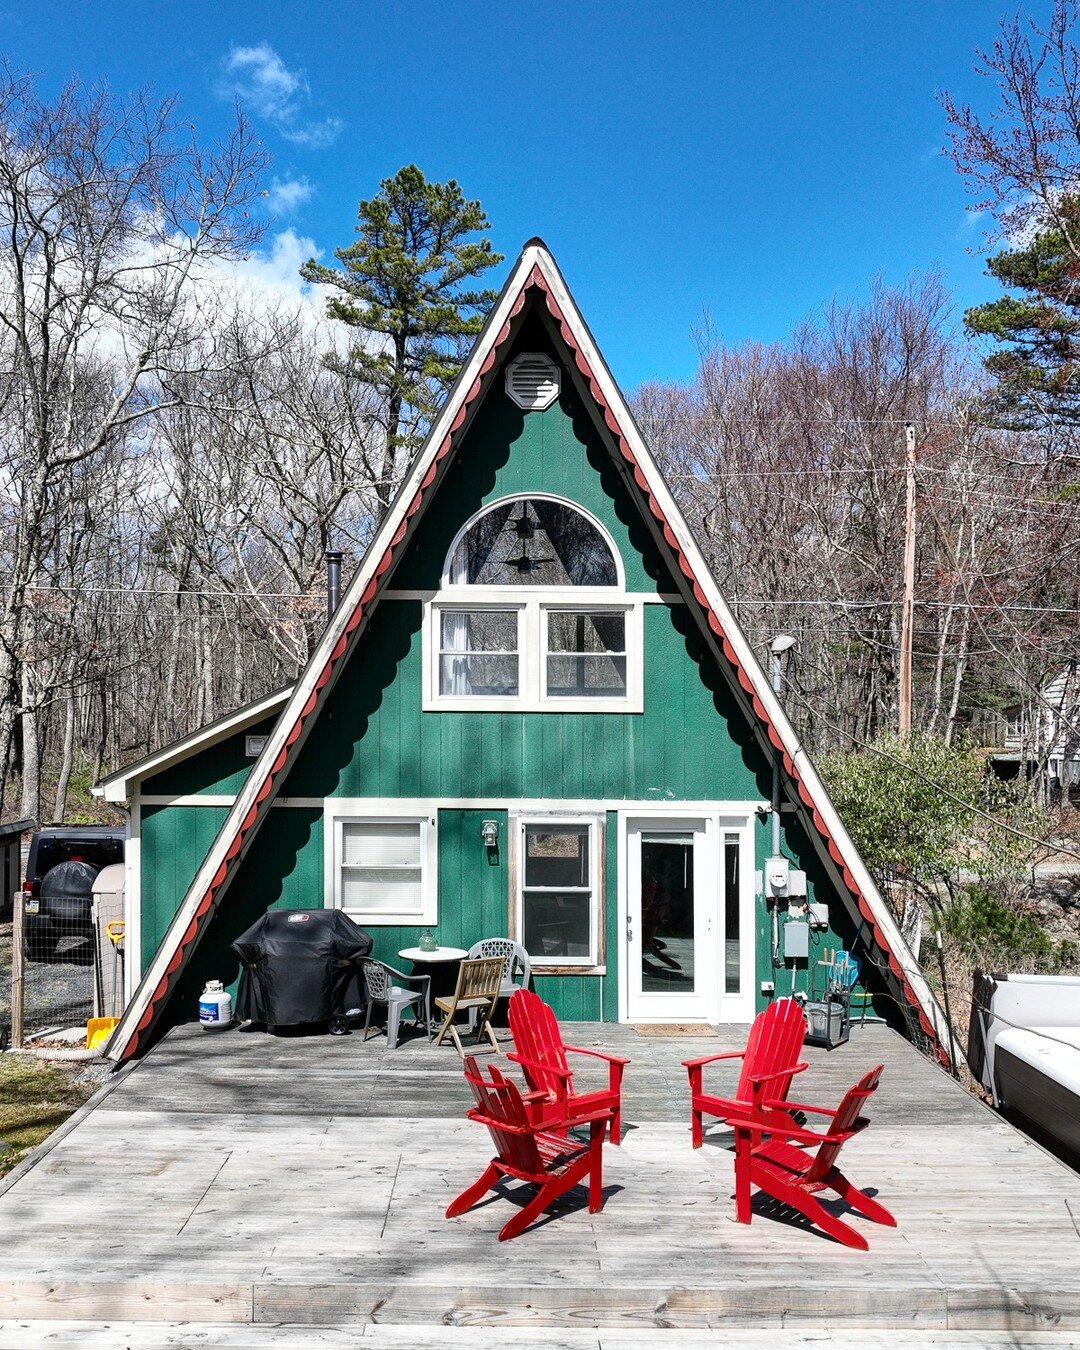 New to Market!

110 Susan Ln
Shohola, PA

OPEN HOUSE Saturday April 6, 12-2pm

I am pleased to introduce you to the Sagamore A Frame, a sweet, vibe-filled cabin near one of the most beautiful lakes in the region, just a 5 minute walk away.

A-frames 